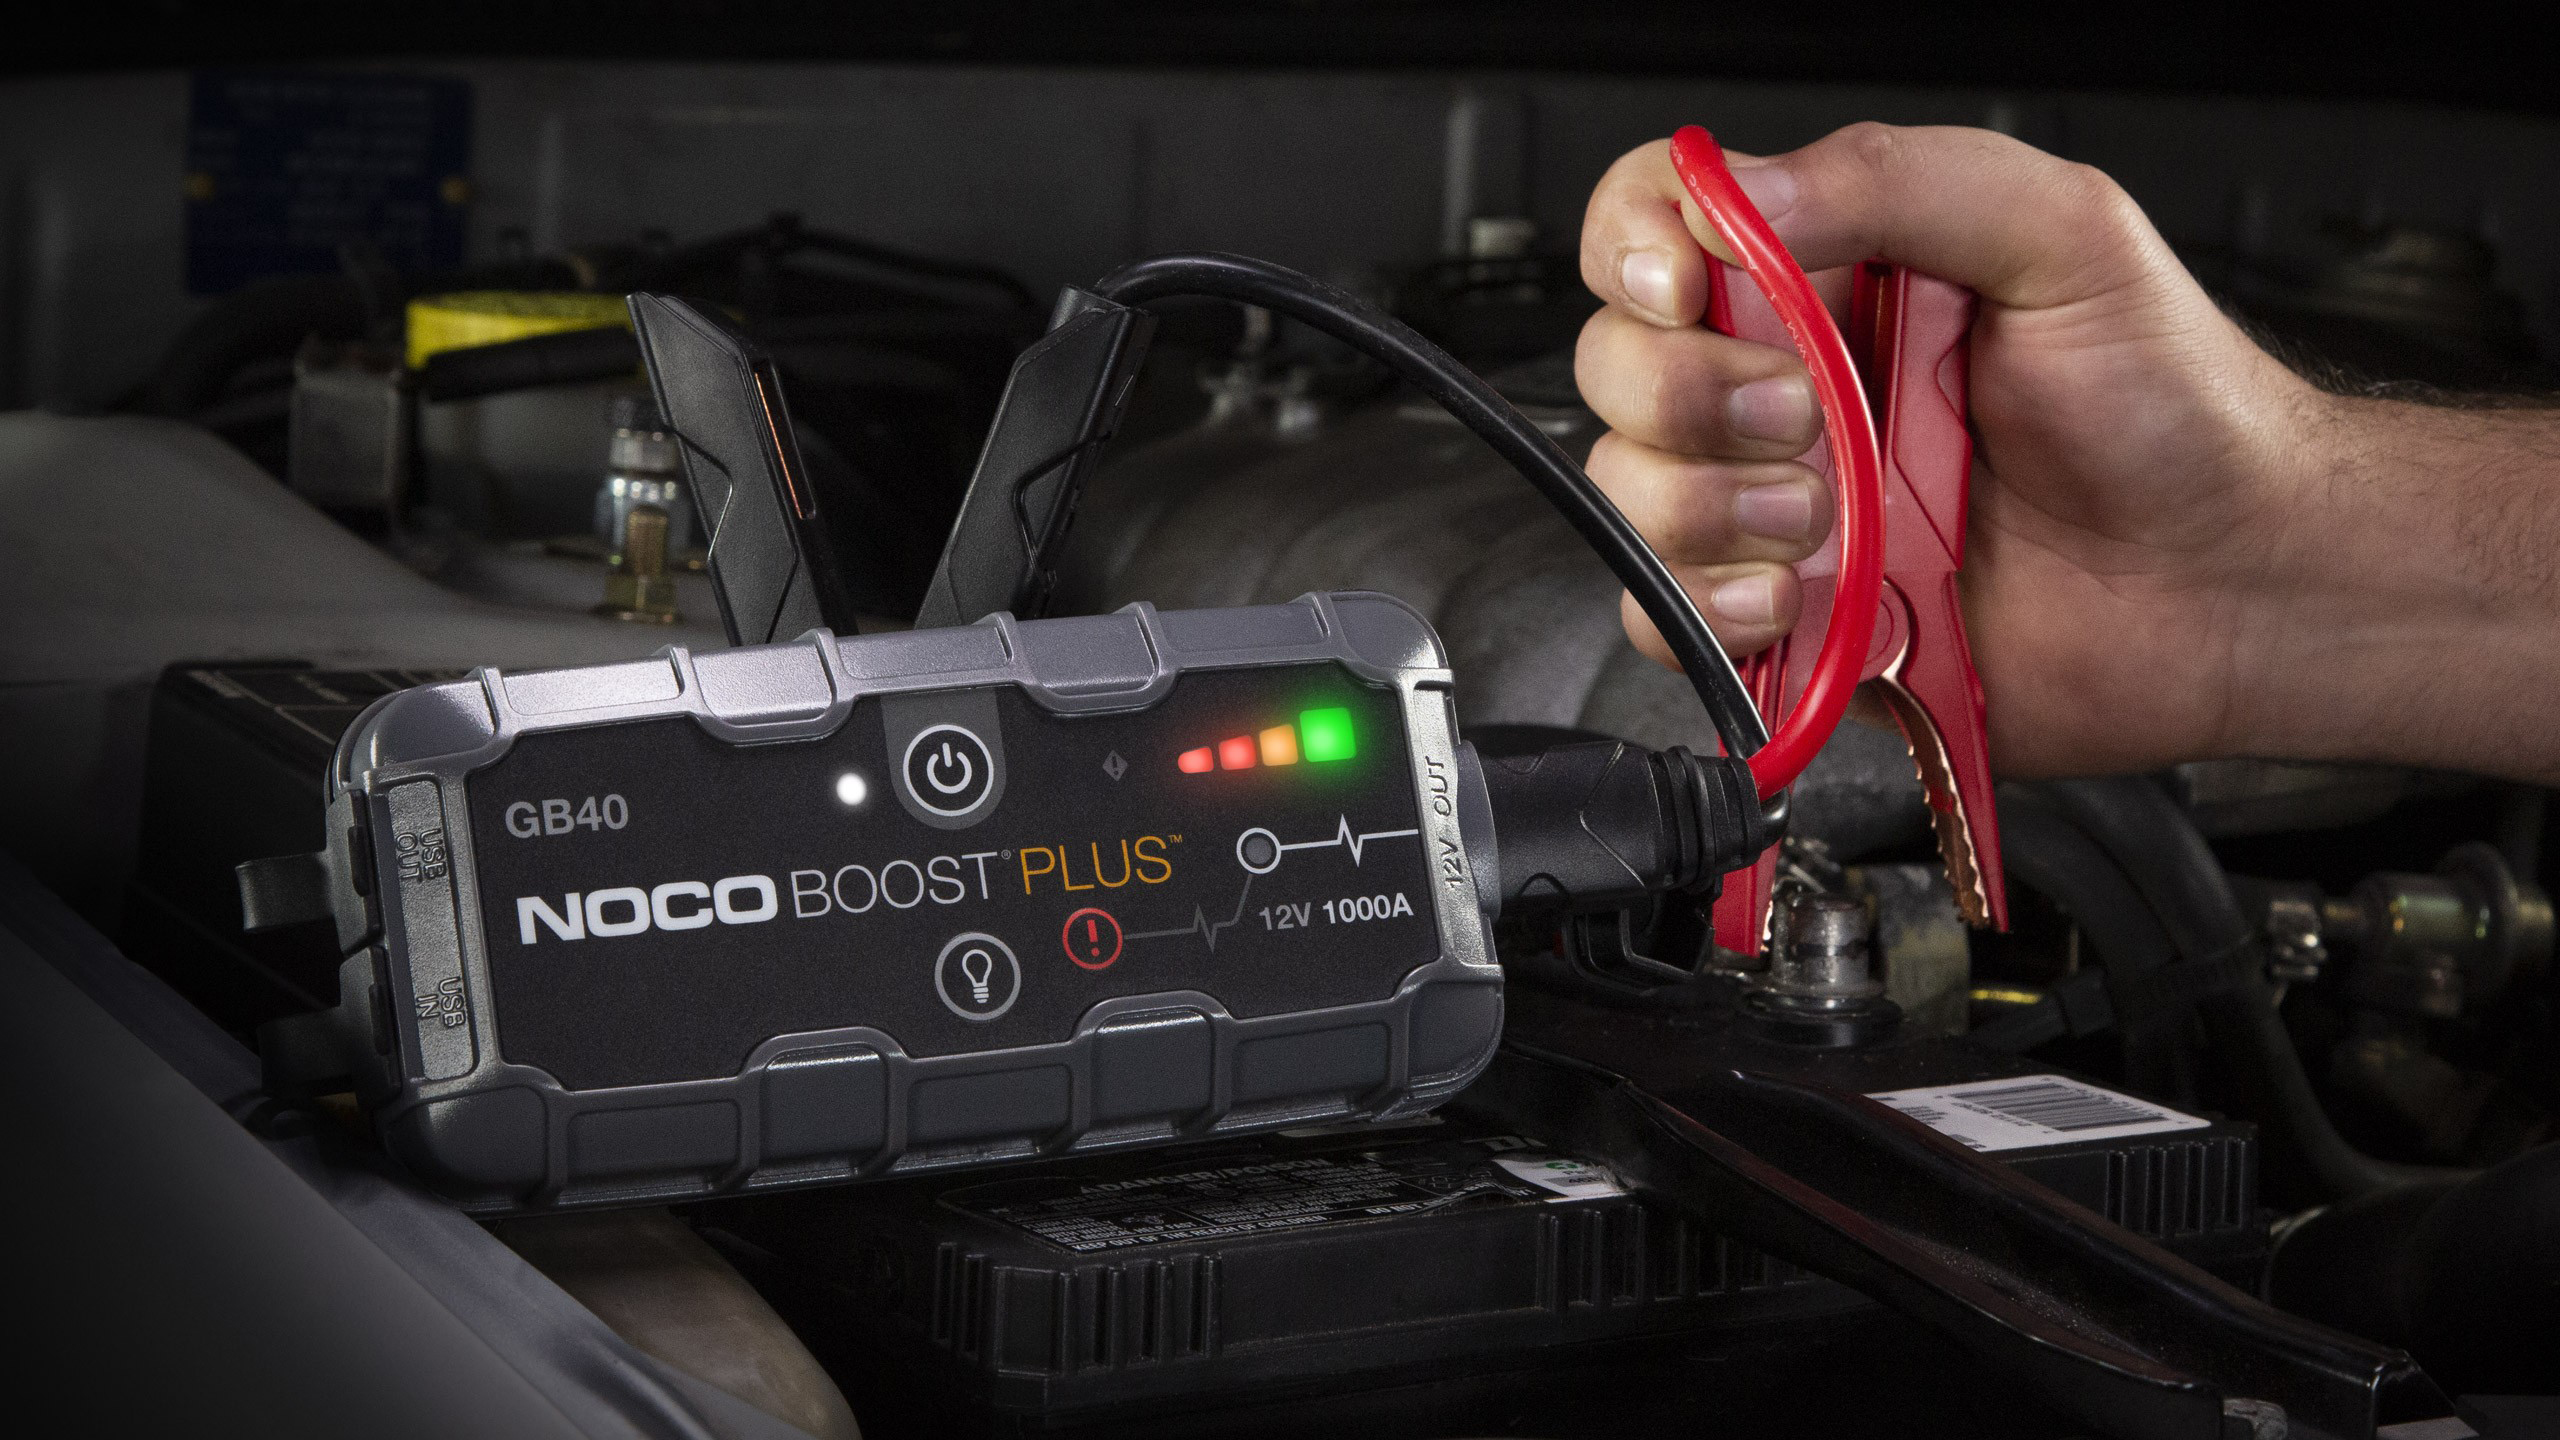 Noco Boost Plus GB40 Jump Starter: powerful and portable but